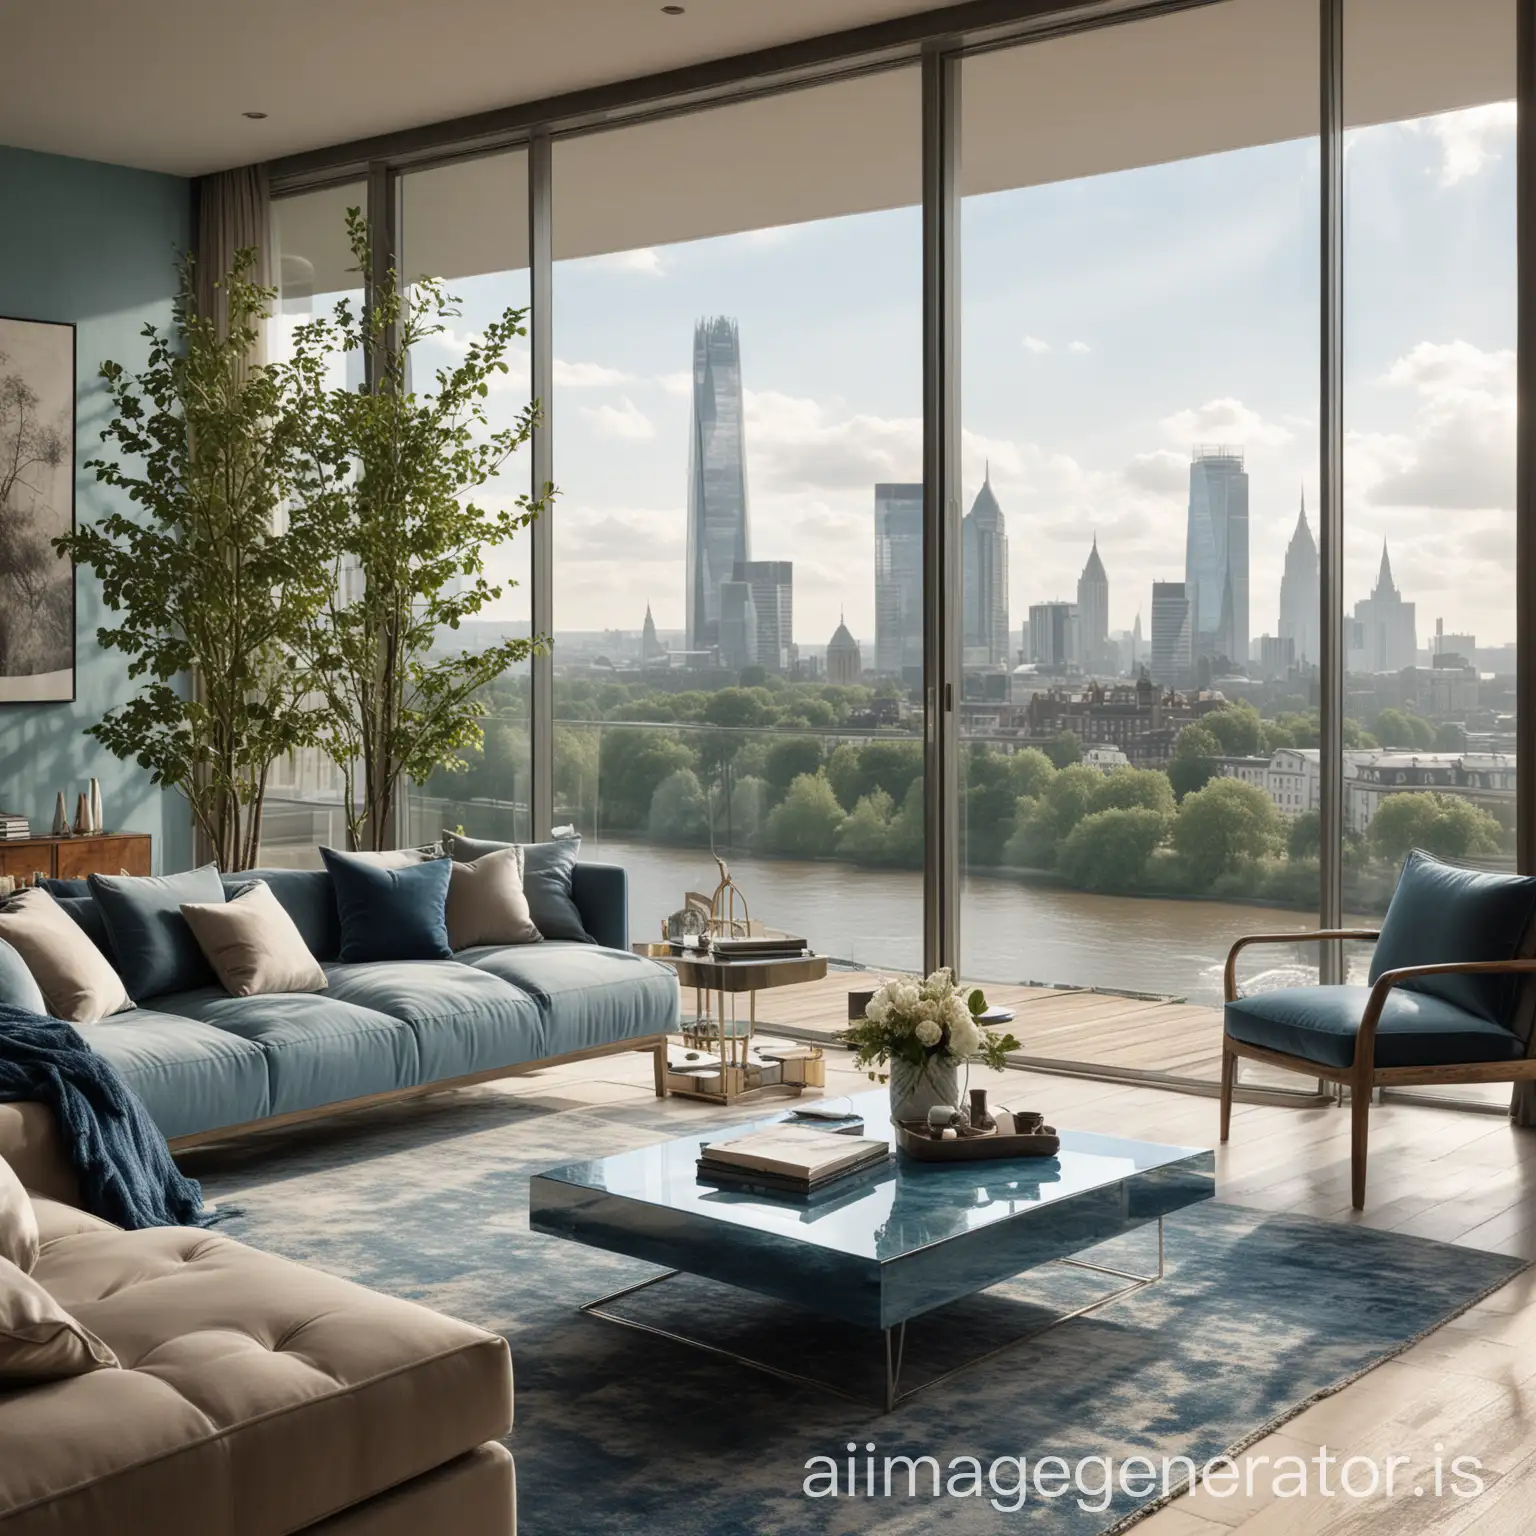 Luxury-Apartment-Interior-Design-with-Thames-River-View-and-Contemporary-Earthy-Blue-Hues